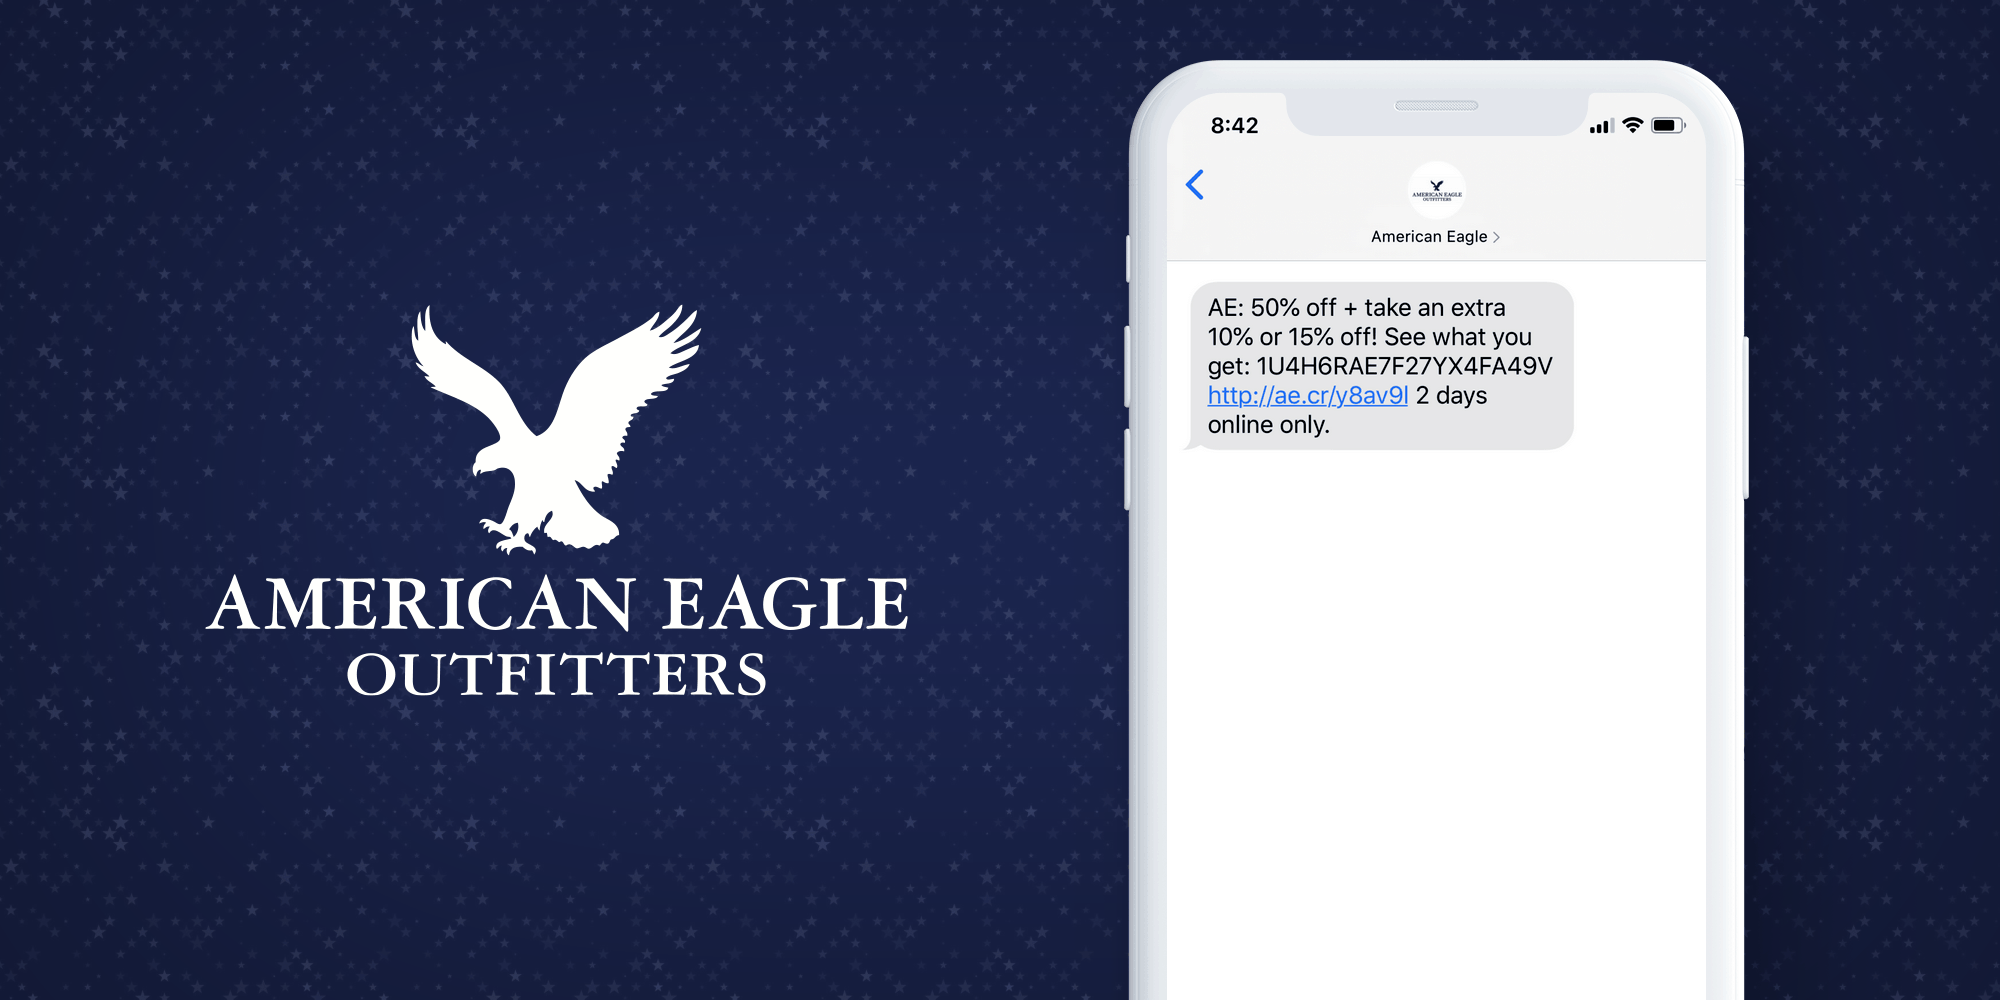 American Eagle SMS Marketing Example - 50 Examples of Brands Using SMS Marketing